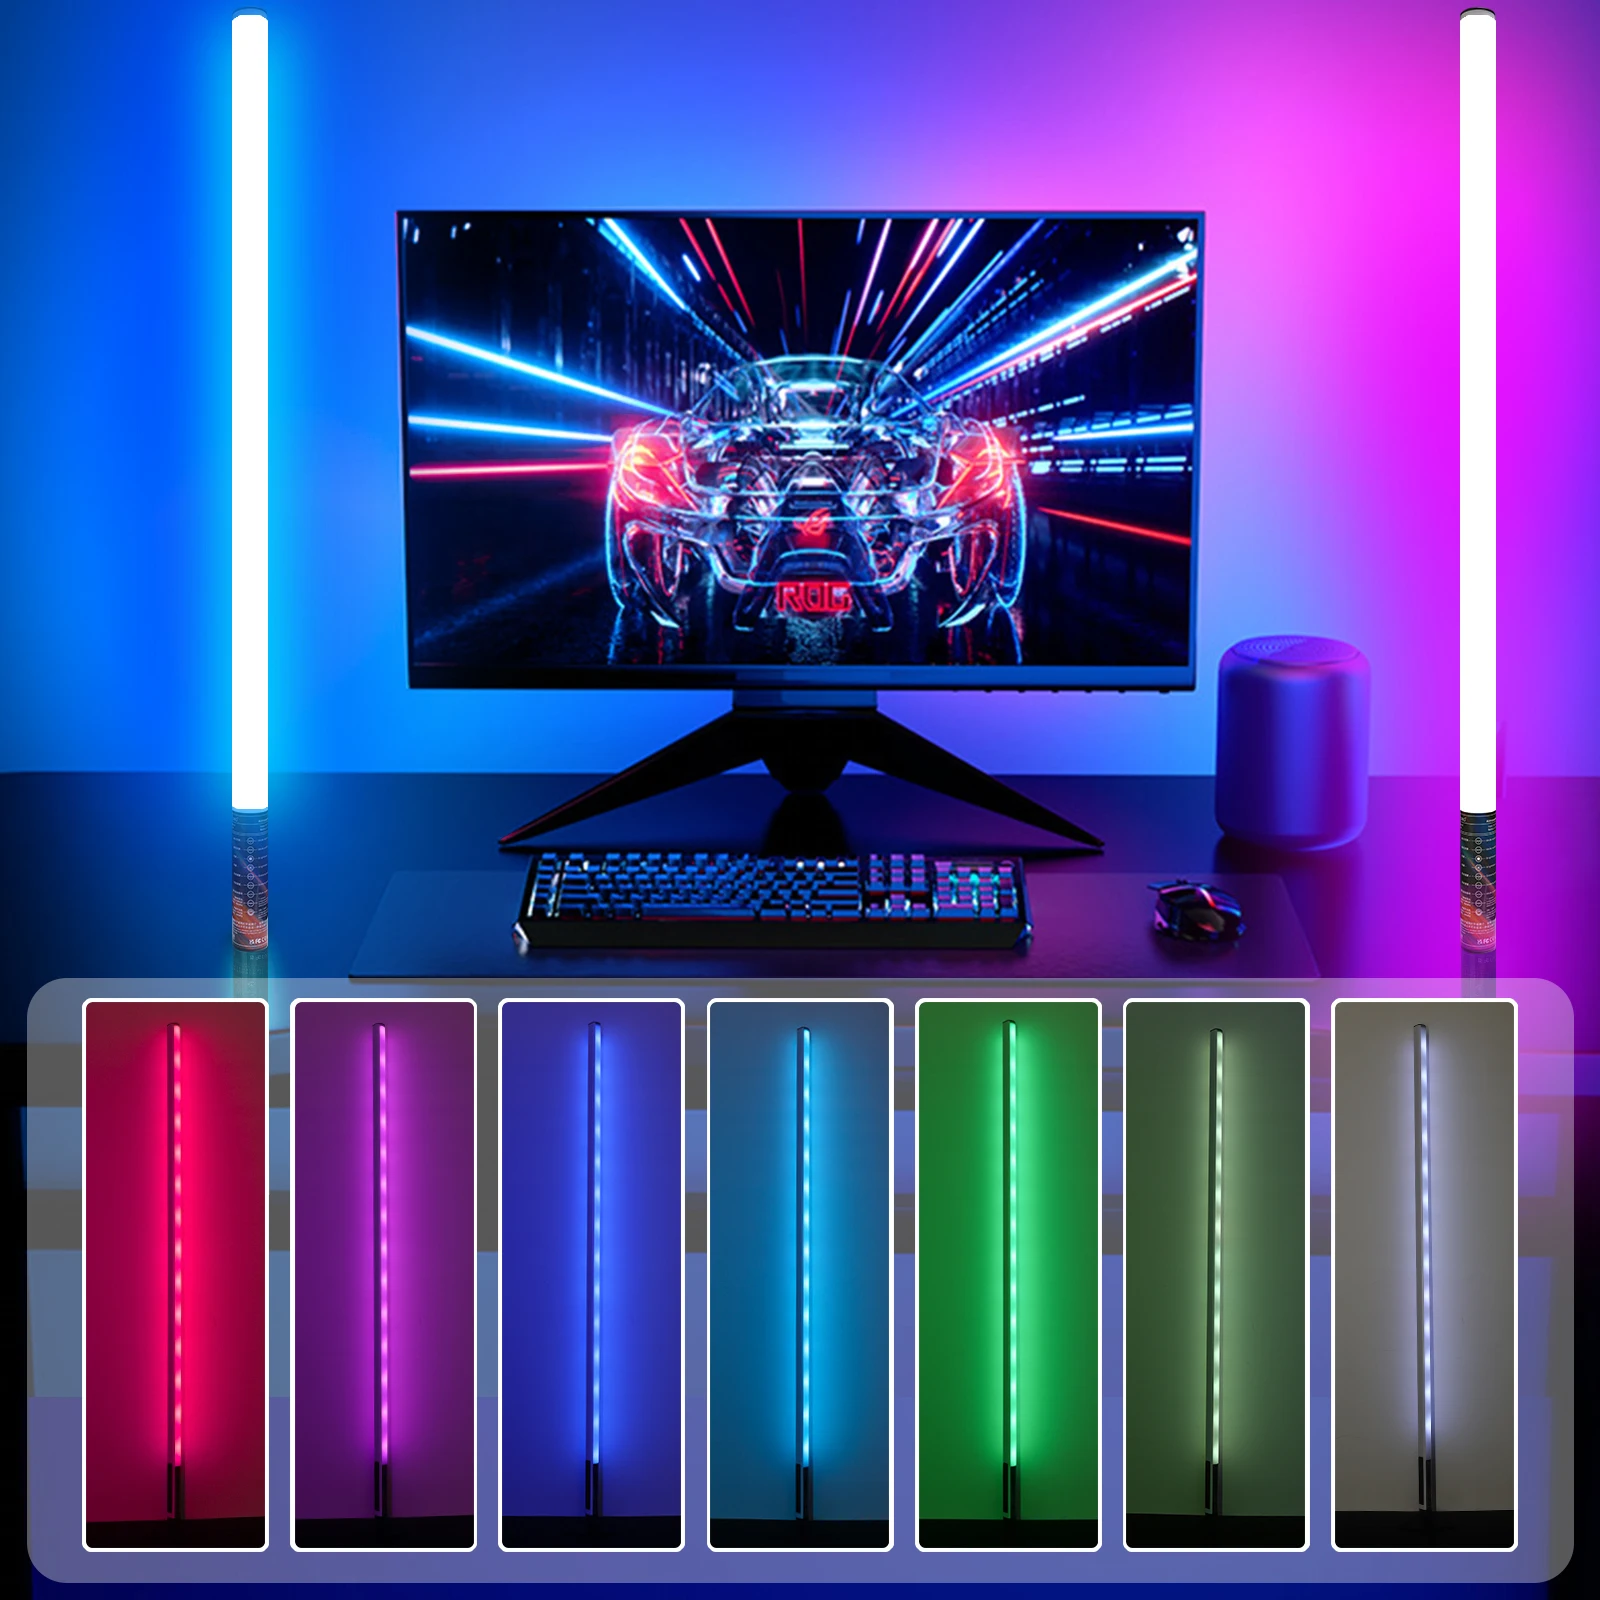 LUXCEO Mood1 85cm LED RGB Light Stick Colorful Atmosphere Lights Lamp Photography Lighting for Car Room Party Bar Decor enlarge